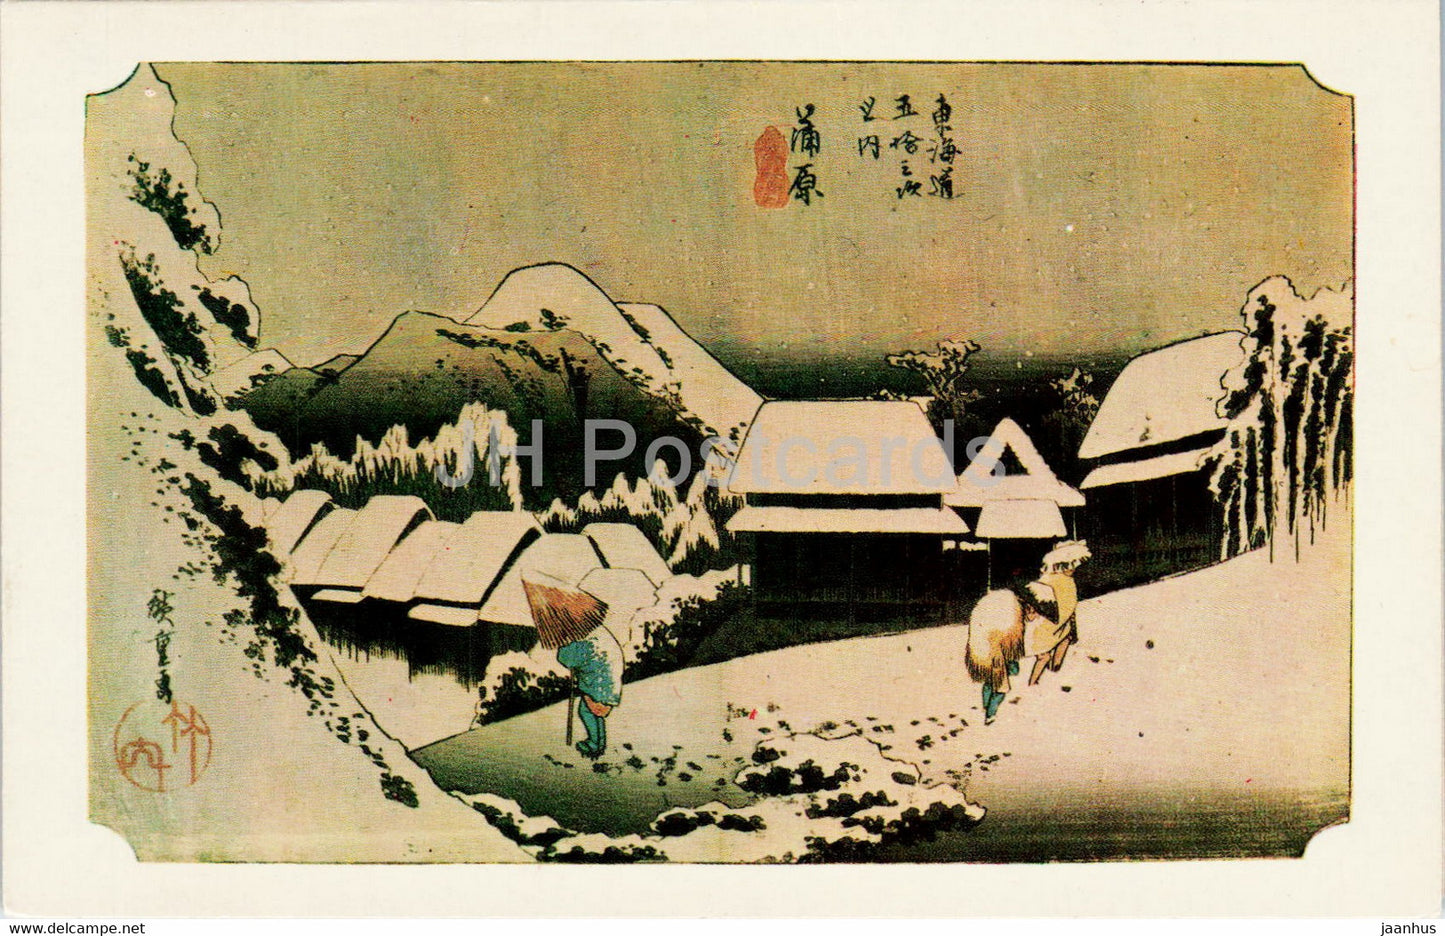 painting by Hiroshige - Evening Snow in Kambara - Japanese art - 1974 - Russia USSR - unused - JH Postcards